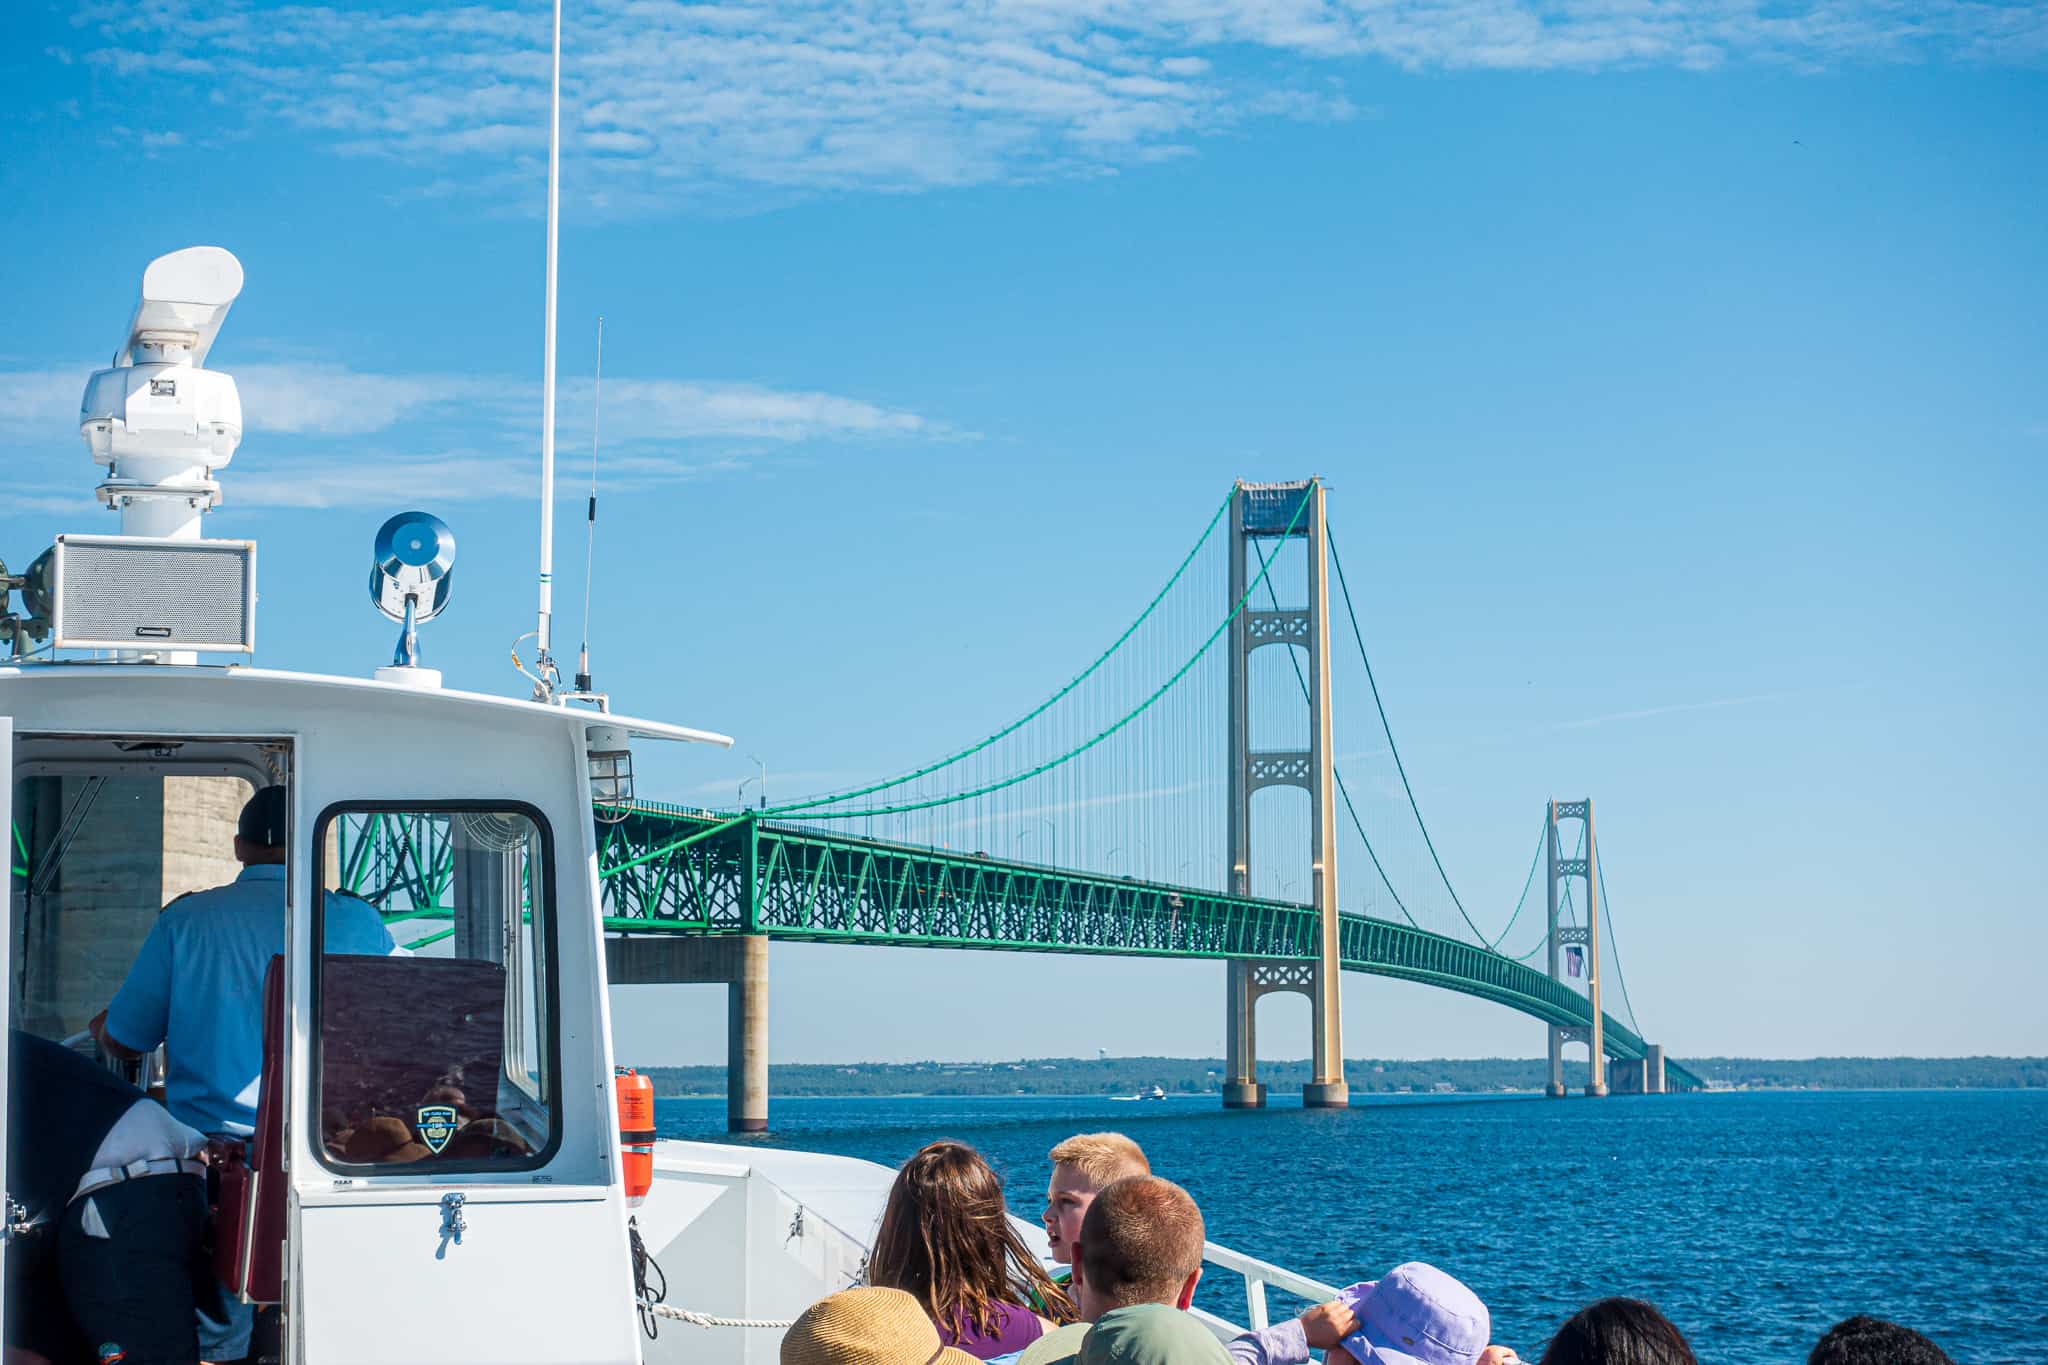 Heading to Mackinac Island from the Ferry while going under Mighty Mac